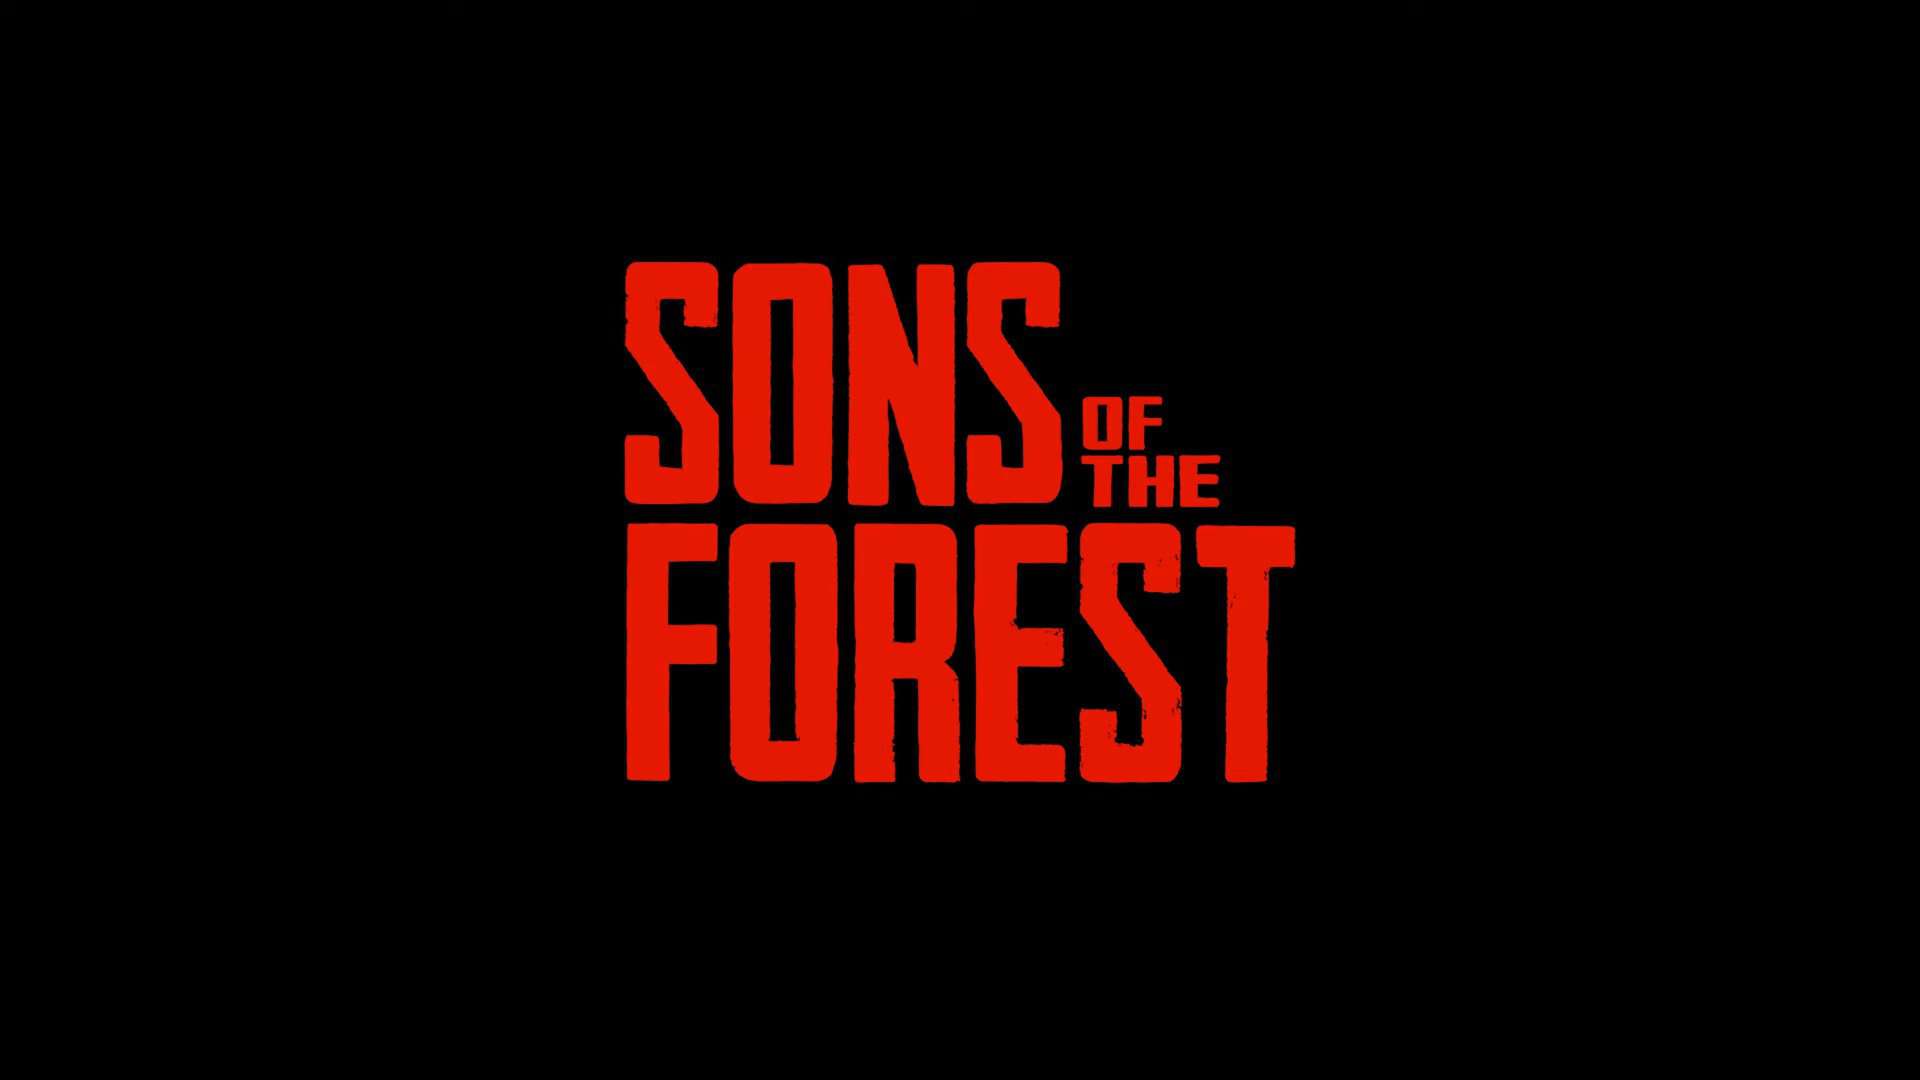 Is there a Creative Mode in Sons of The Forest? - Answered